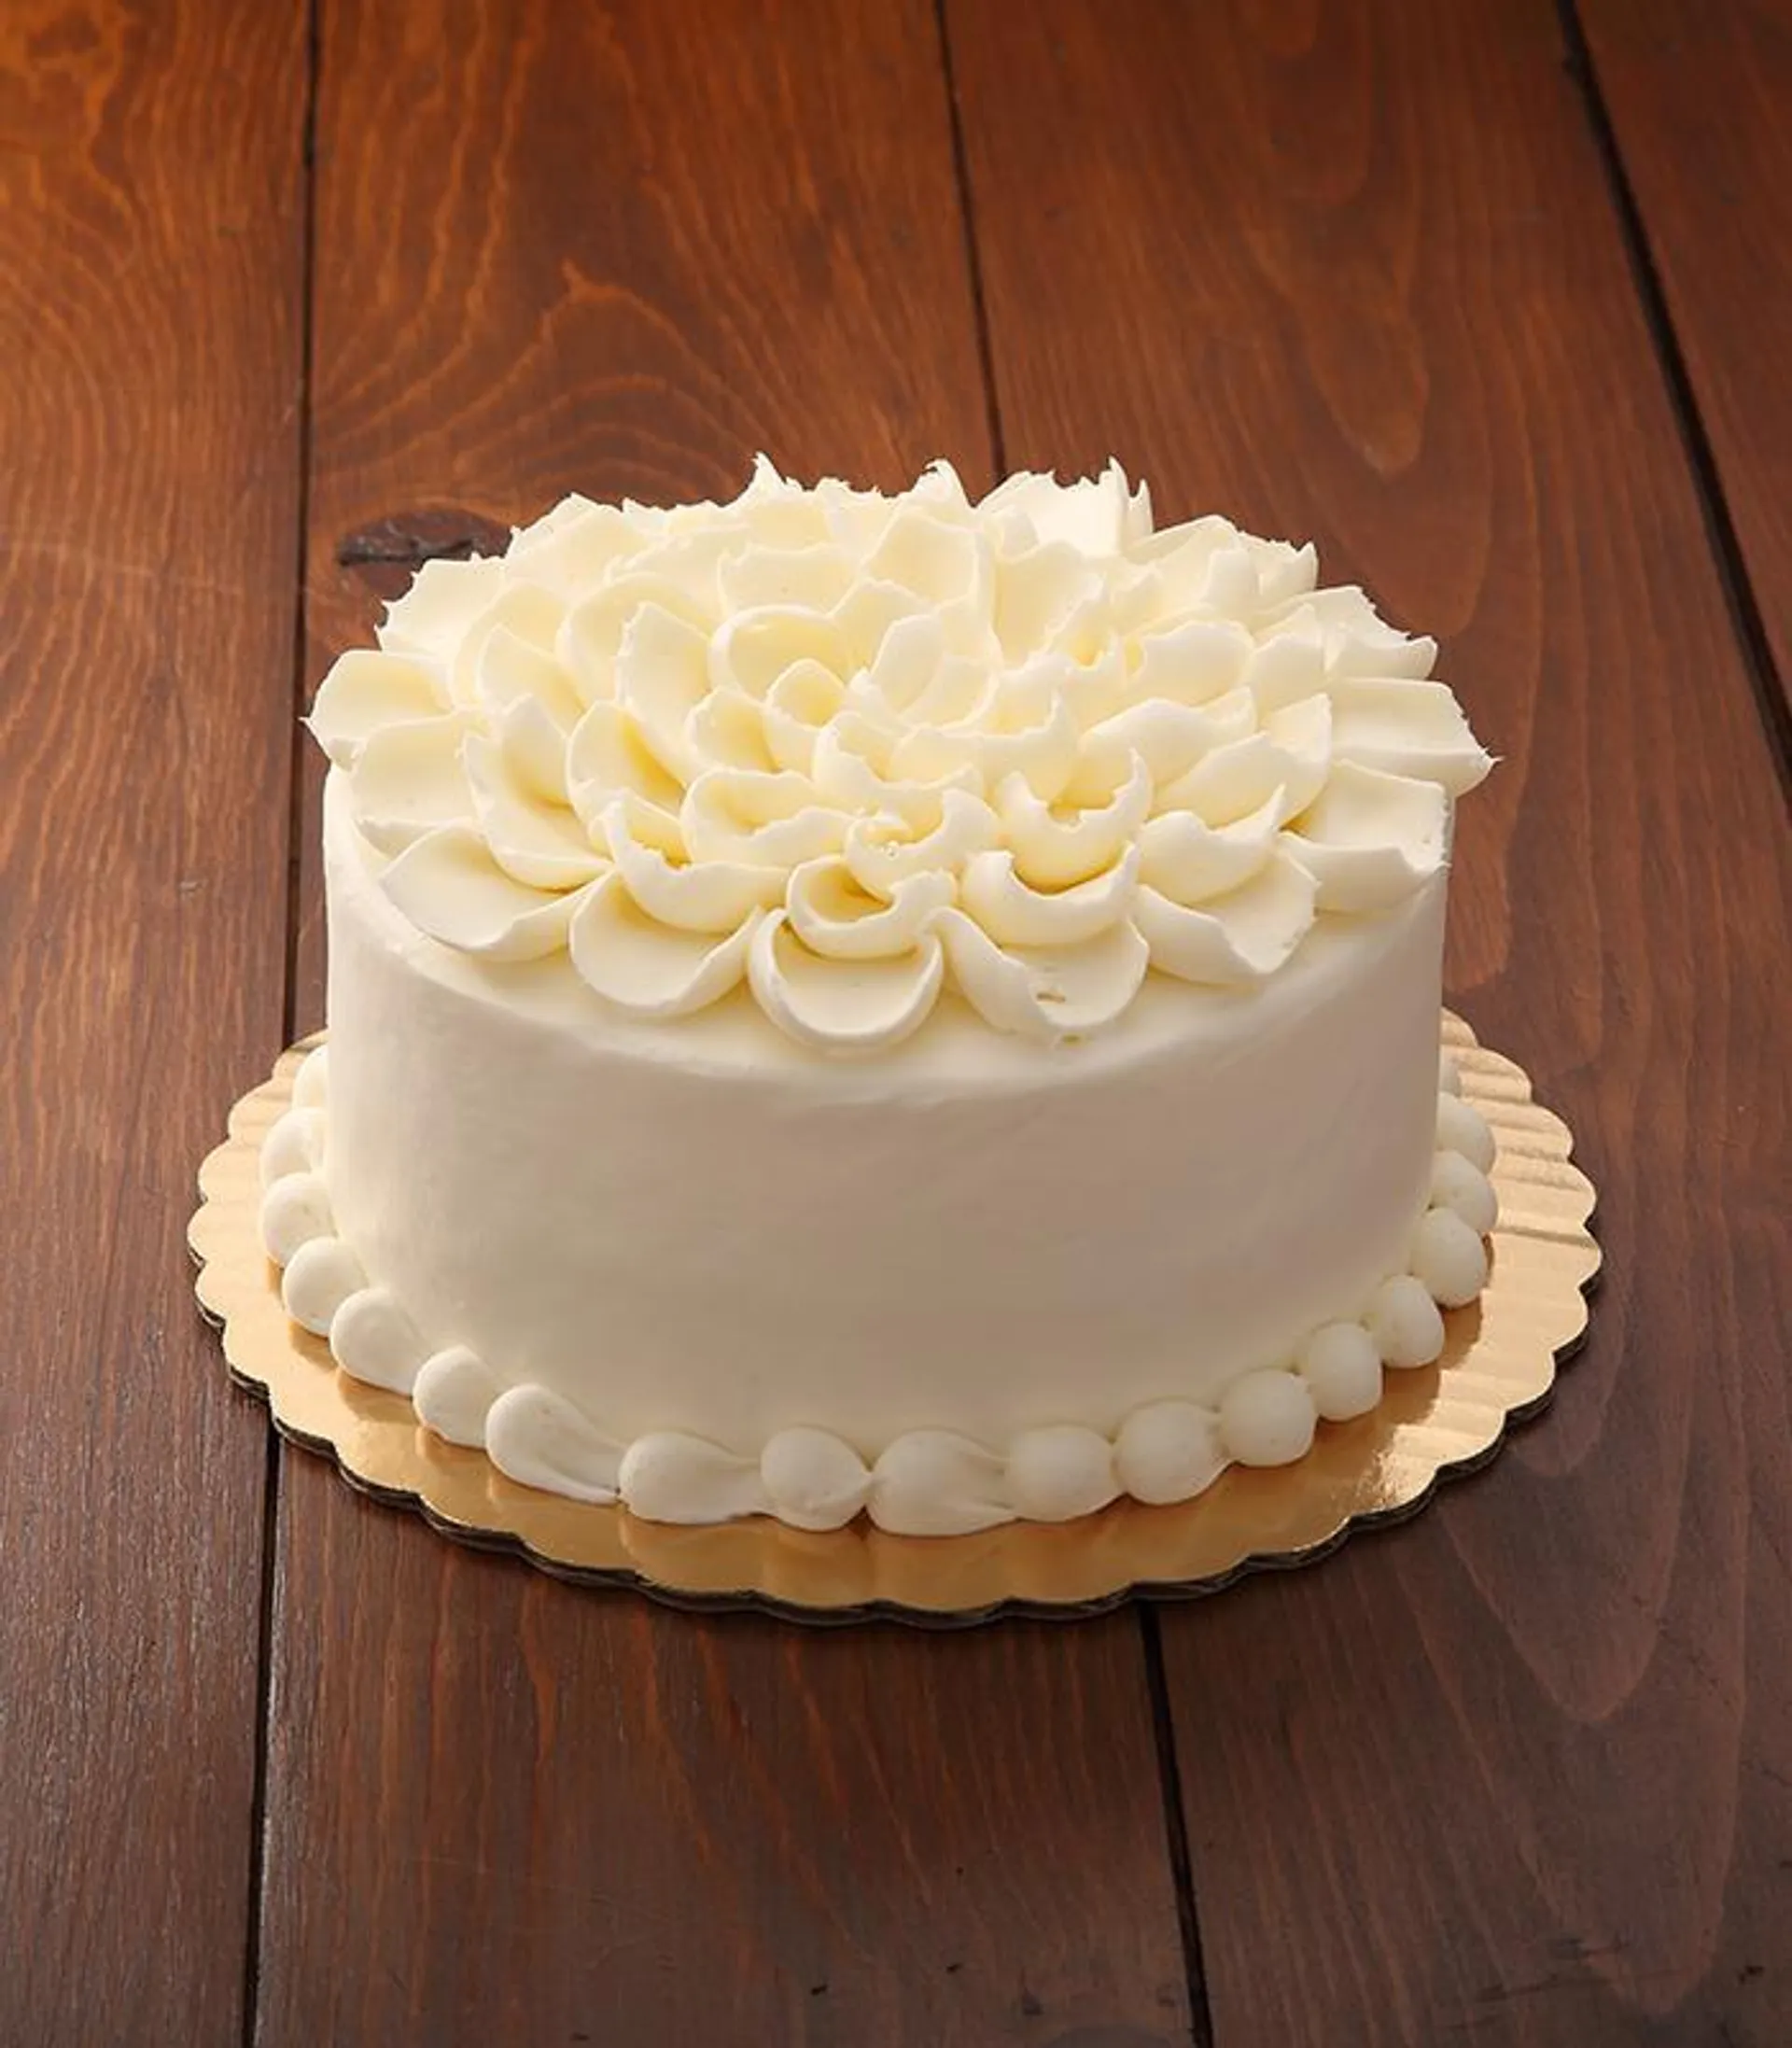 Champagne Cake - 7” Double Layer (Serves 8-12)